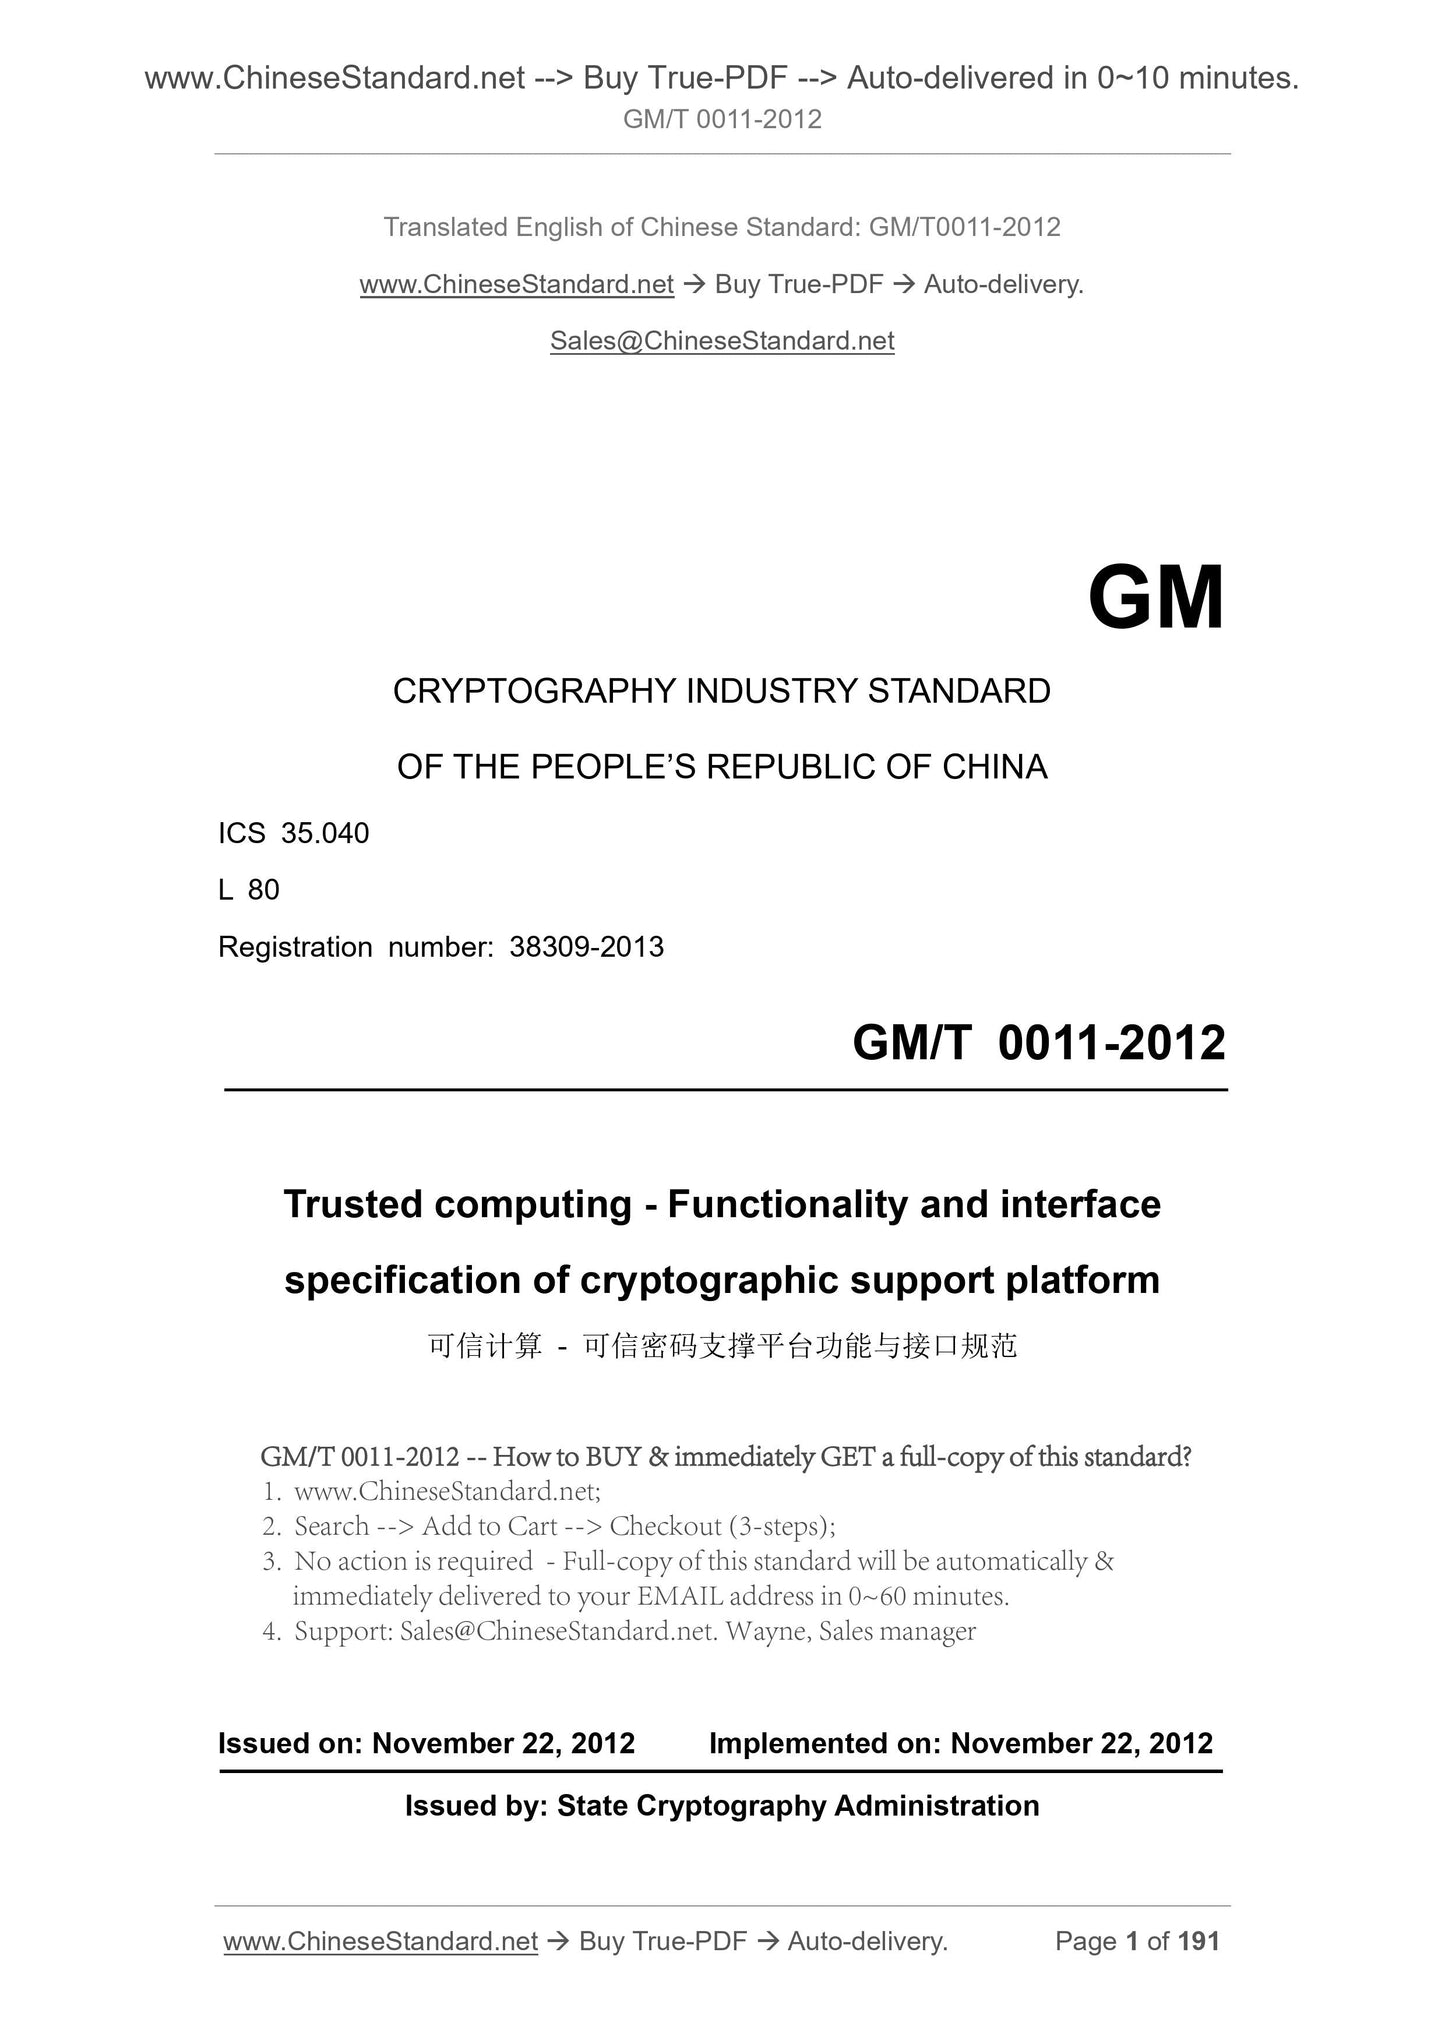 GM/T 0011-2012 Page 1